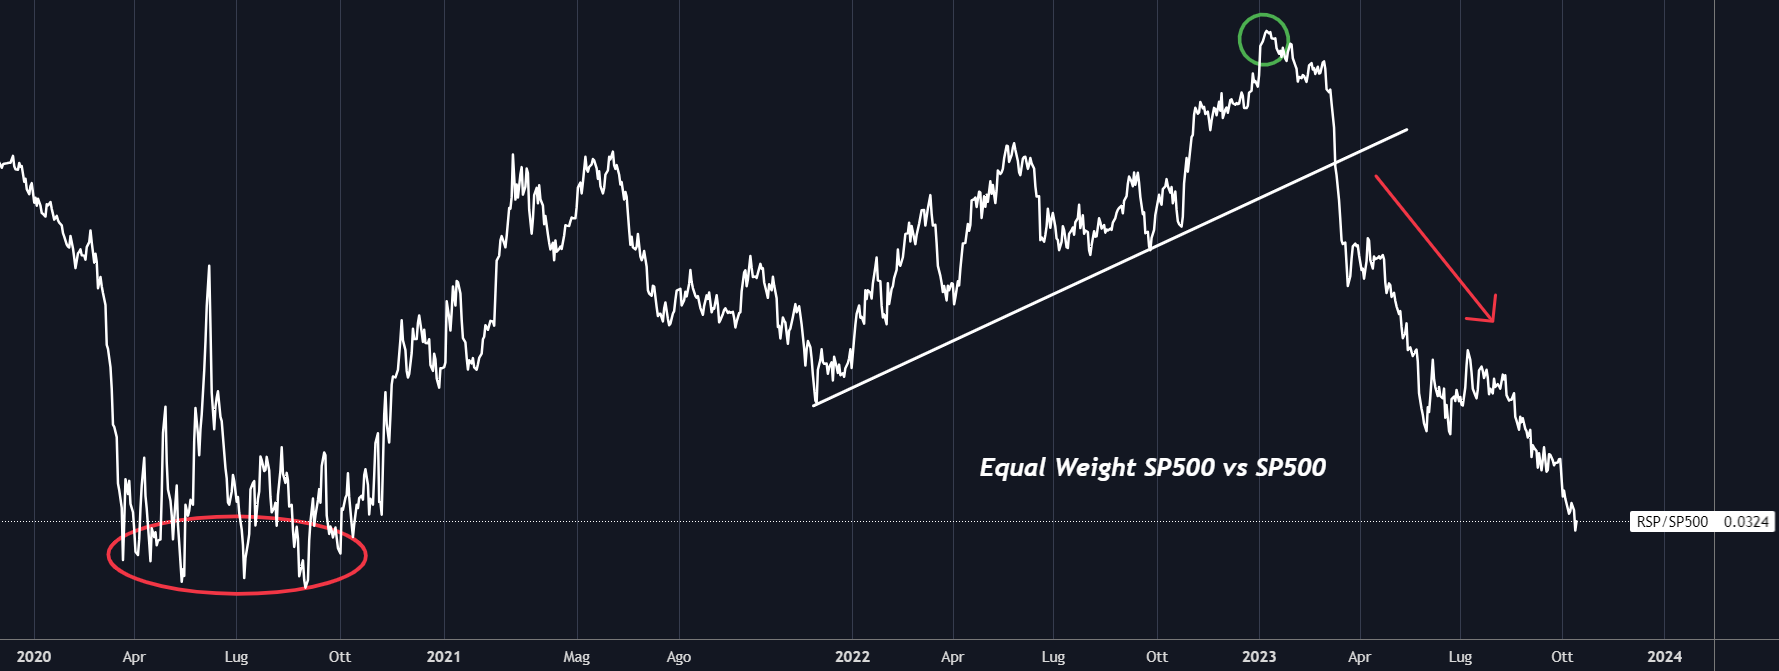 Equal Weight S&P 500 vs S&P 500